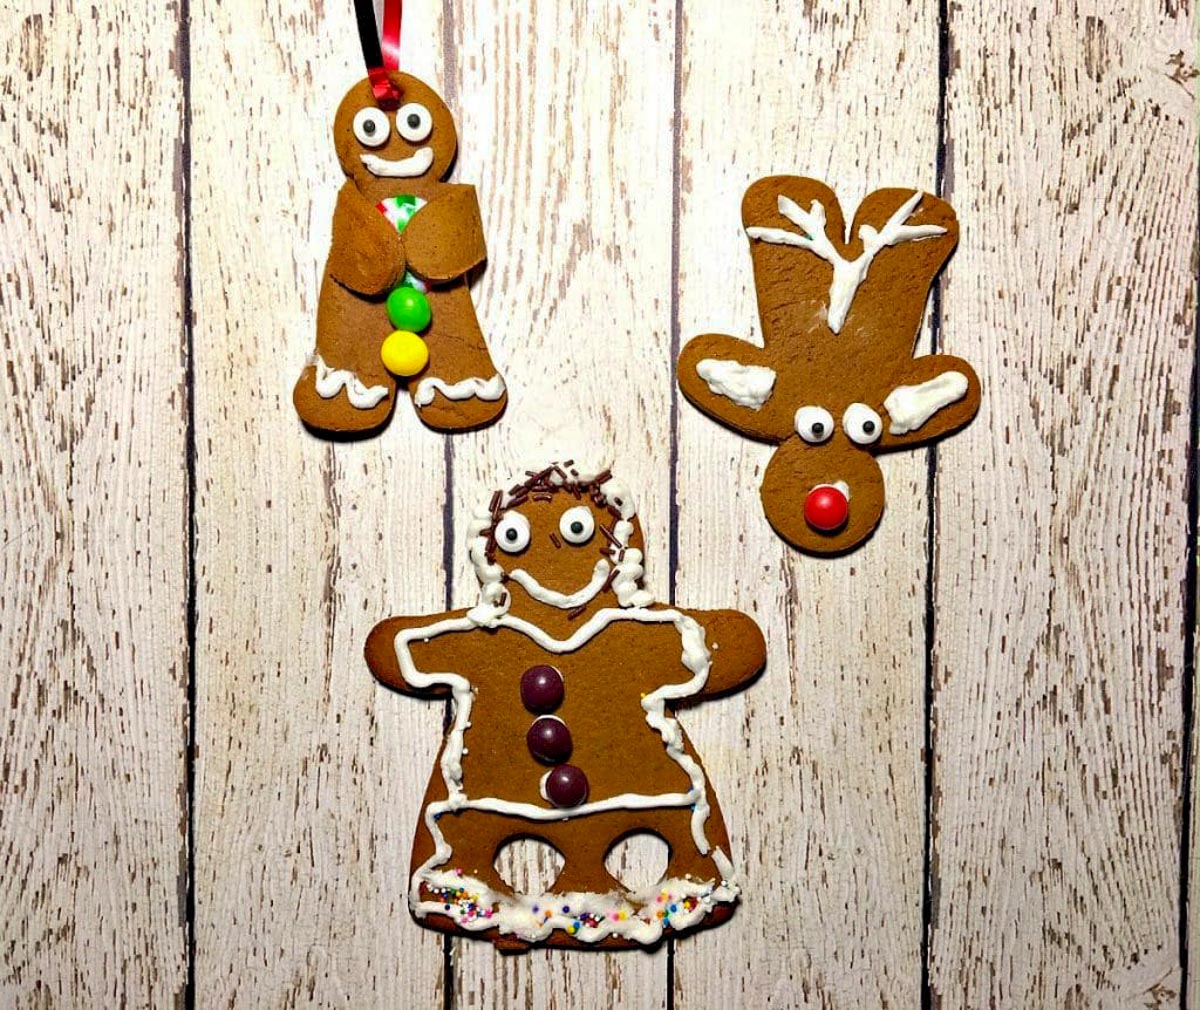 3 gingerbread cookies (a reindeer, dancing gingerbread girl and a gingerbread man) on a white faux wooden surface